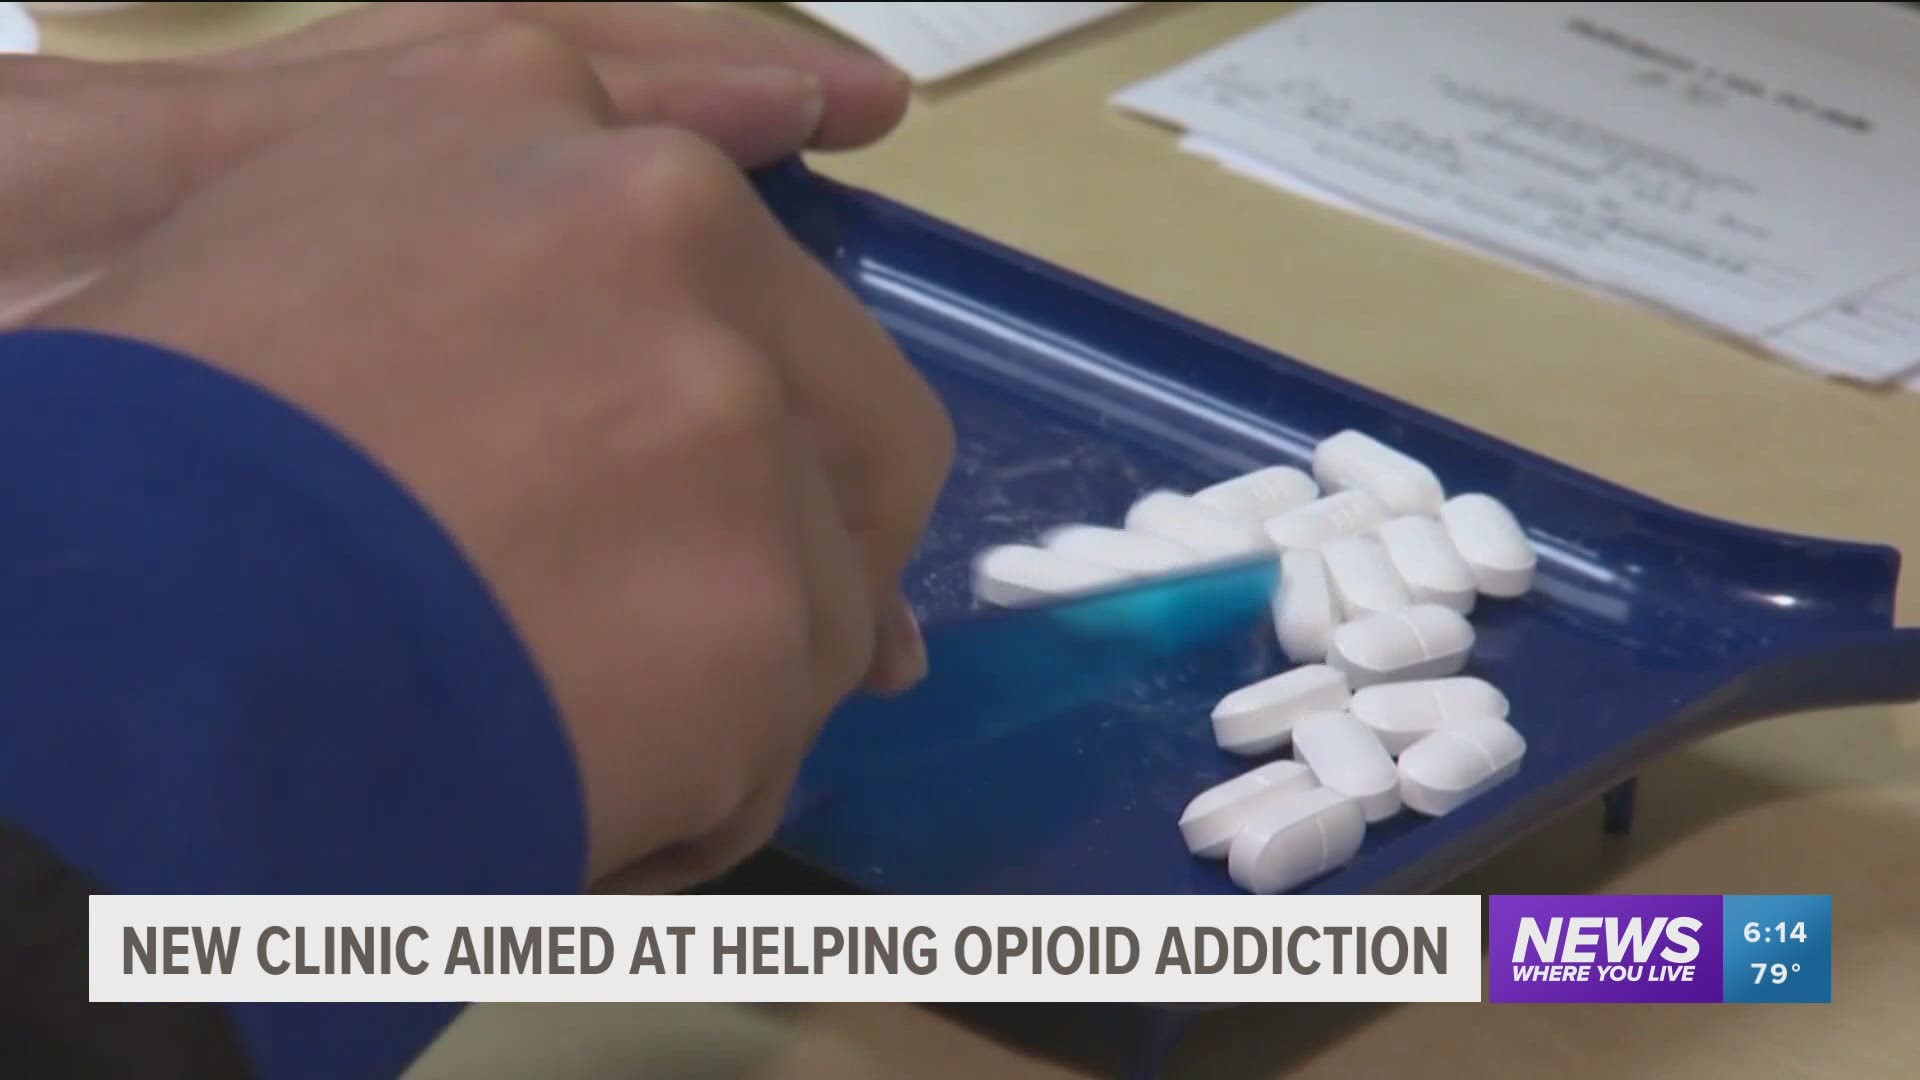 The River Valley saw some of the highest opioid-related deaths in 2020.